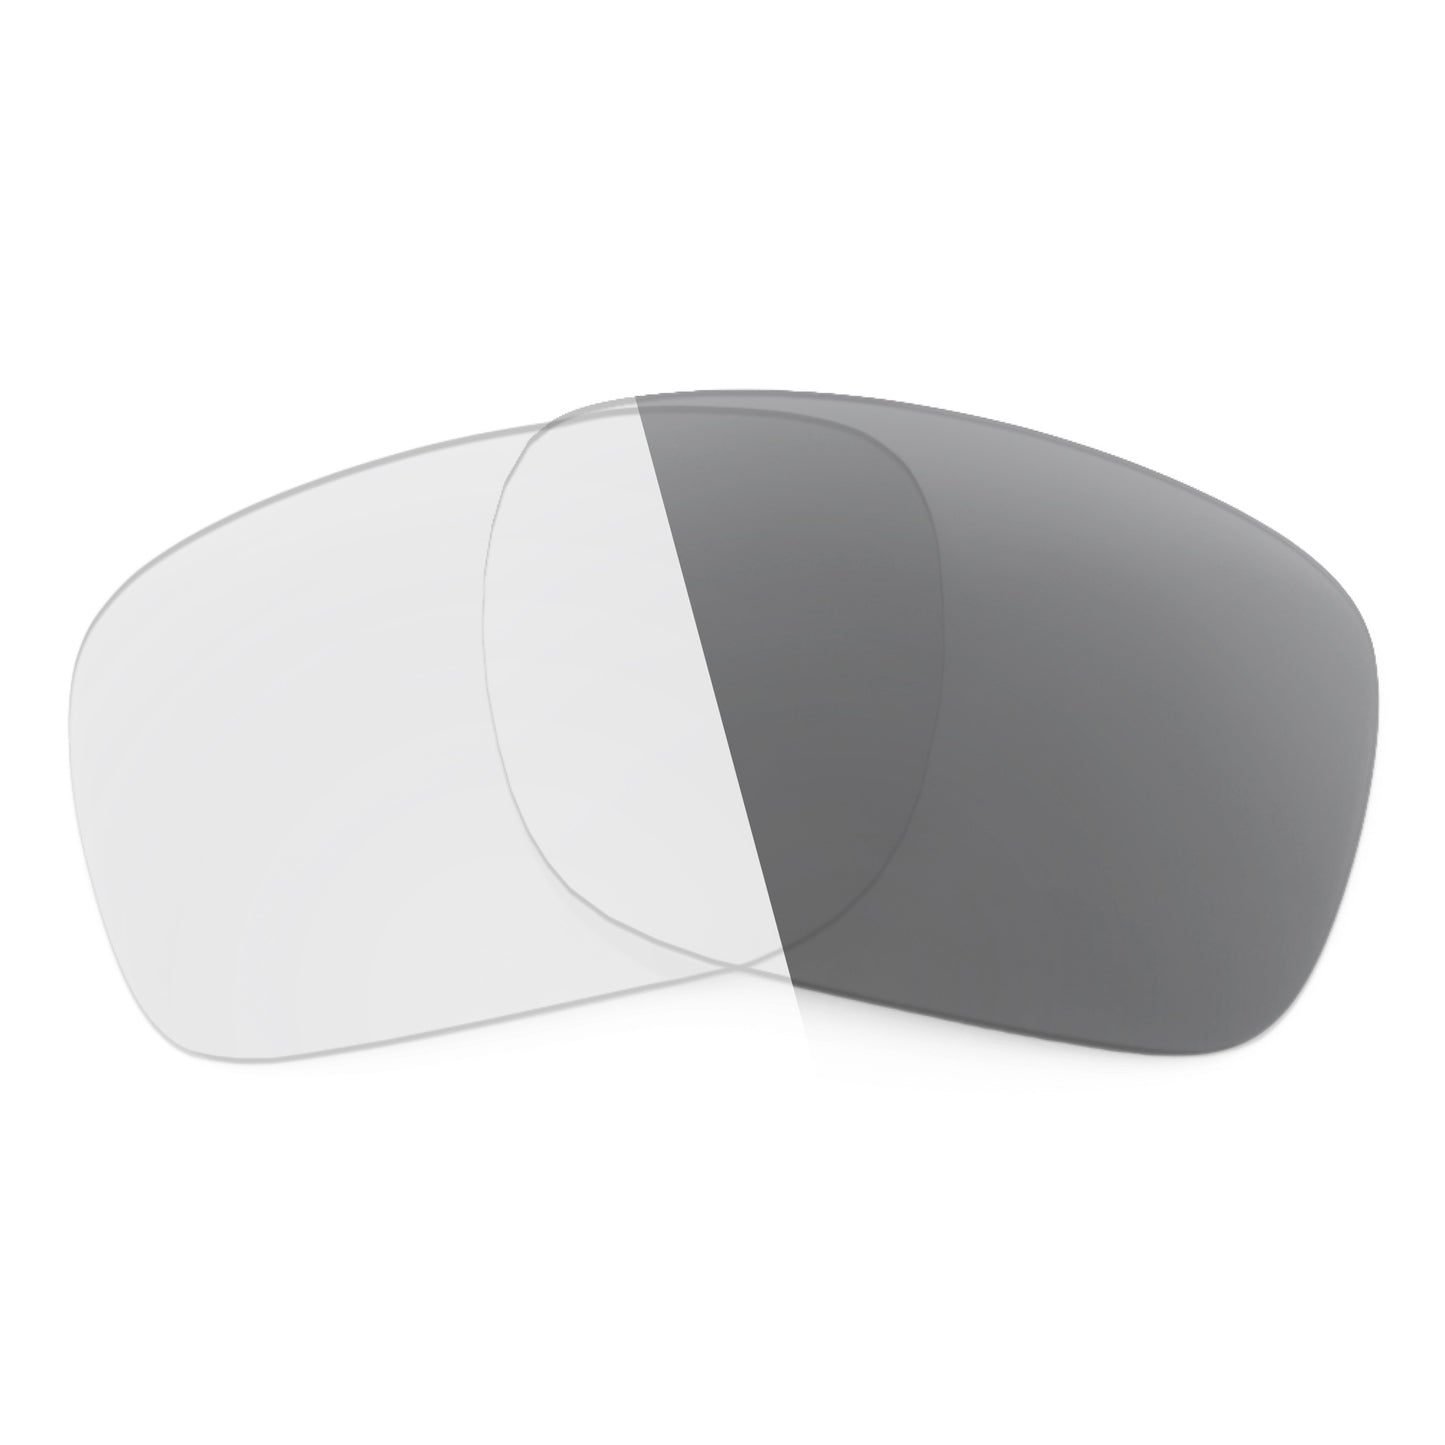 Revant replacement lenses for Ray-Ban RB4347 60mm Non-Polarized Adapt Gray Photochromic